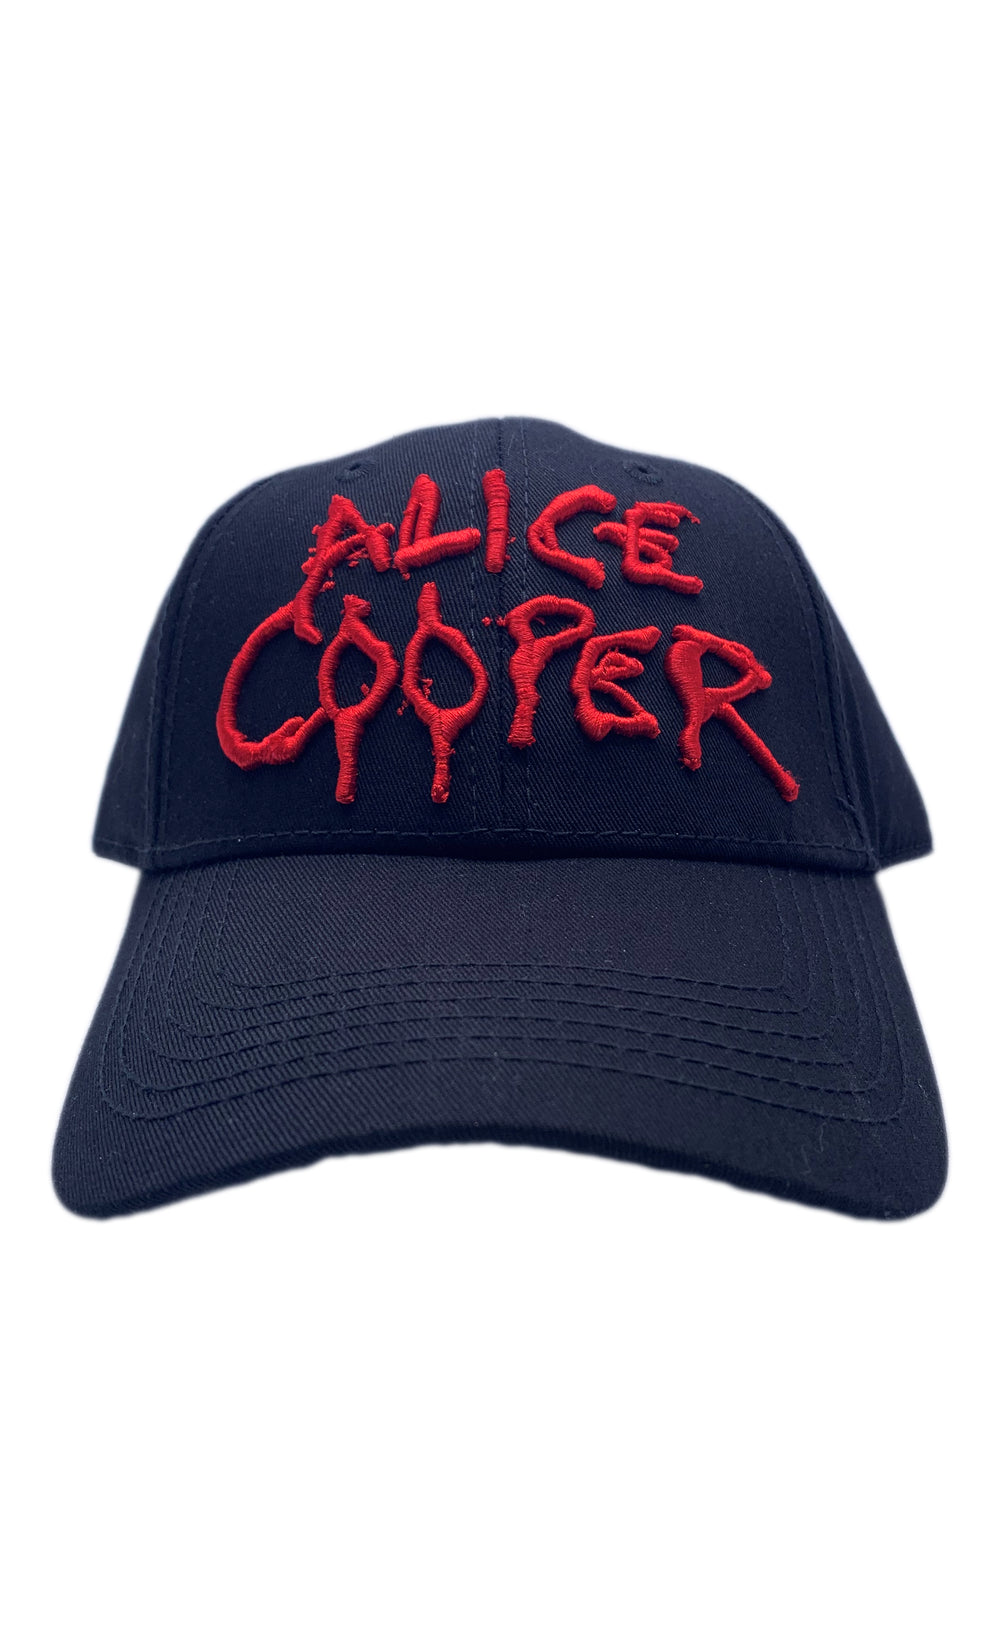 Alice Cooper Eyes Logo Chunky Embroidery Official Cap Adjustable Brand New Red